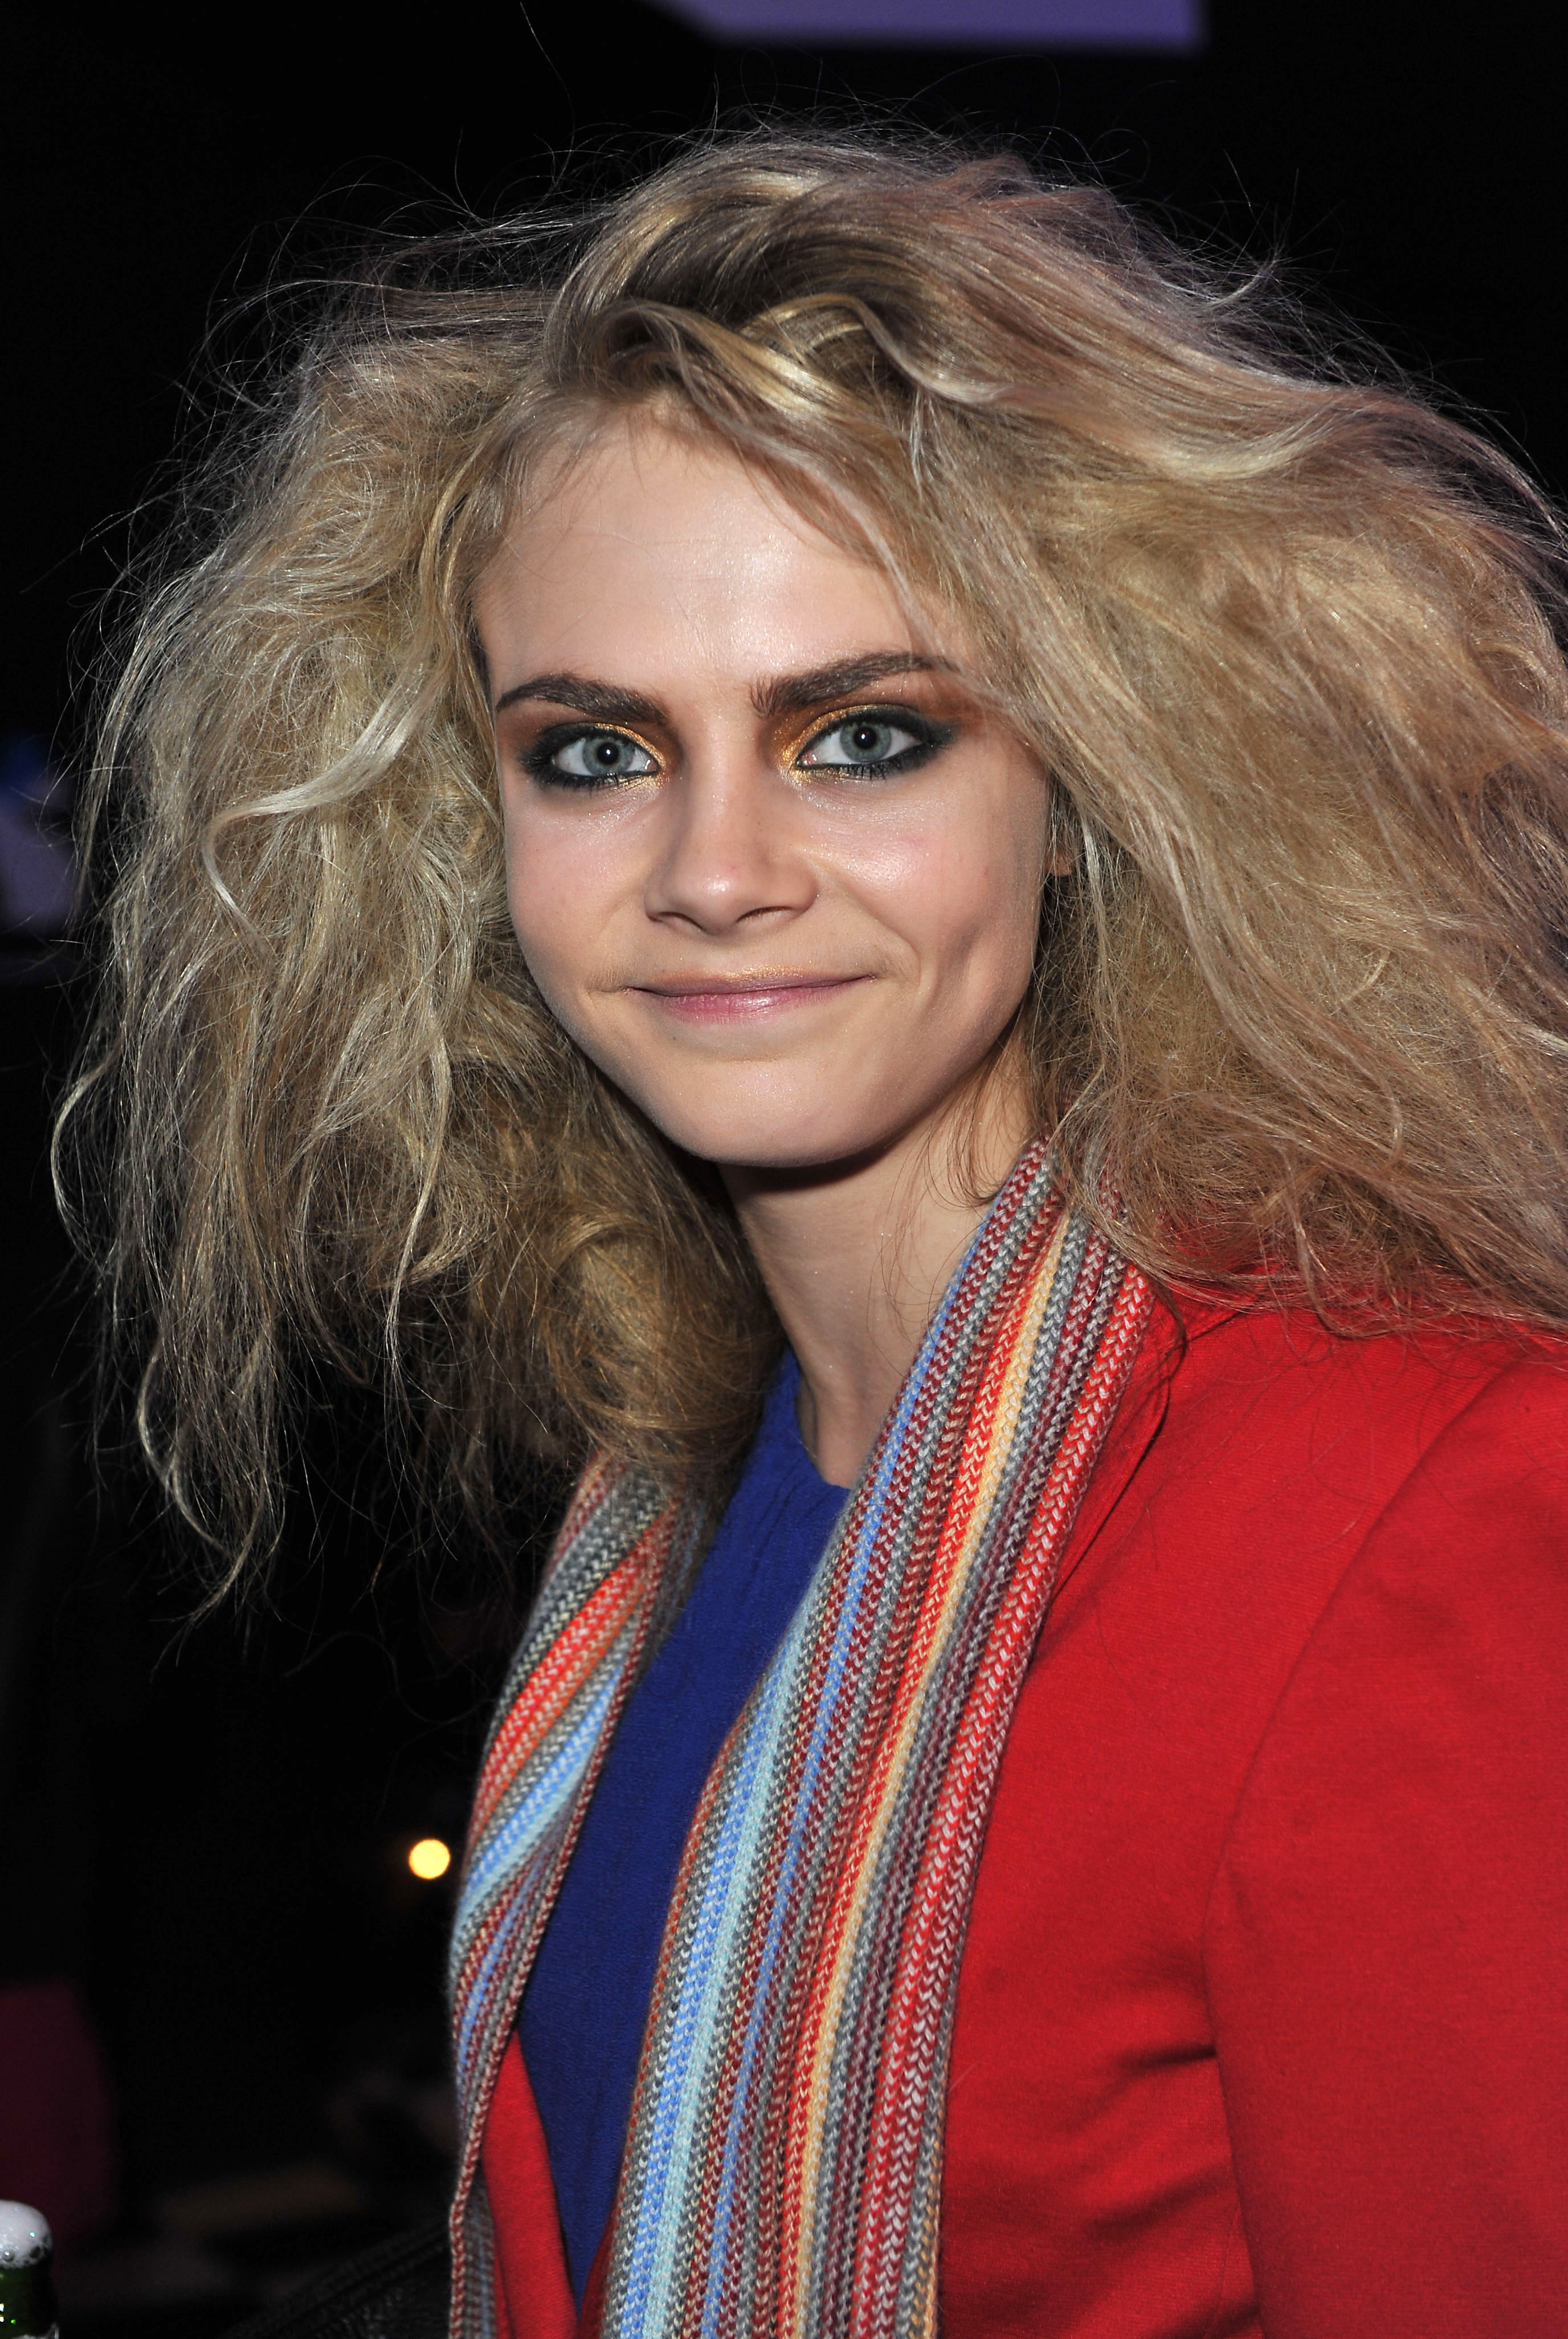 Cara Delevingne on February 23, 2010 | Source: Getty Images